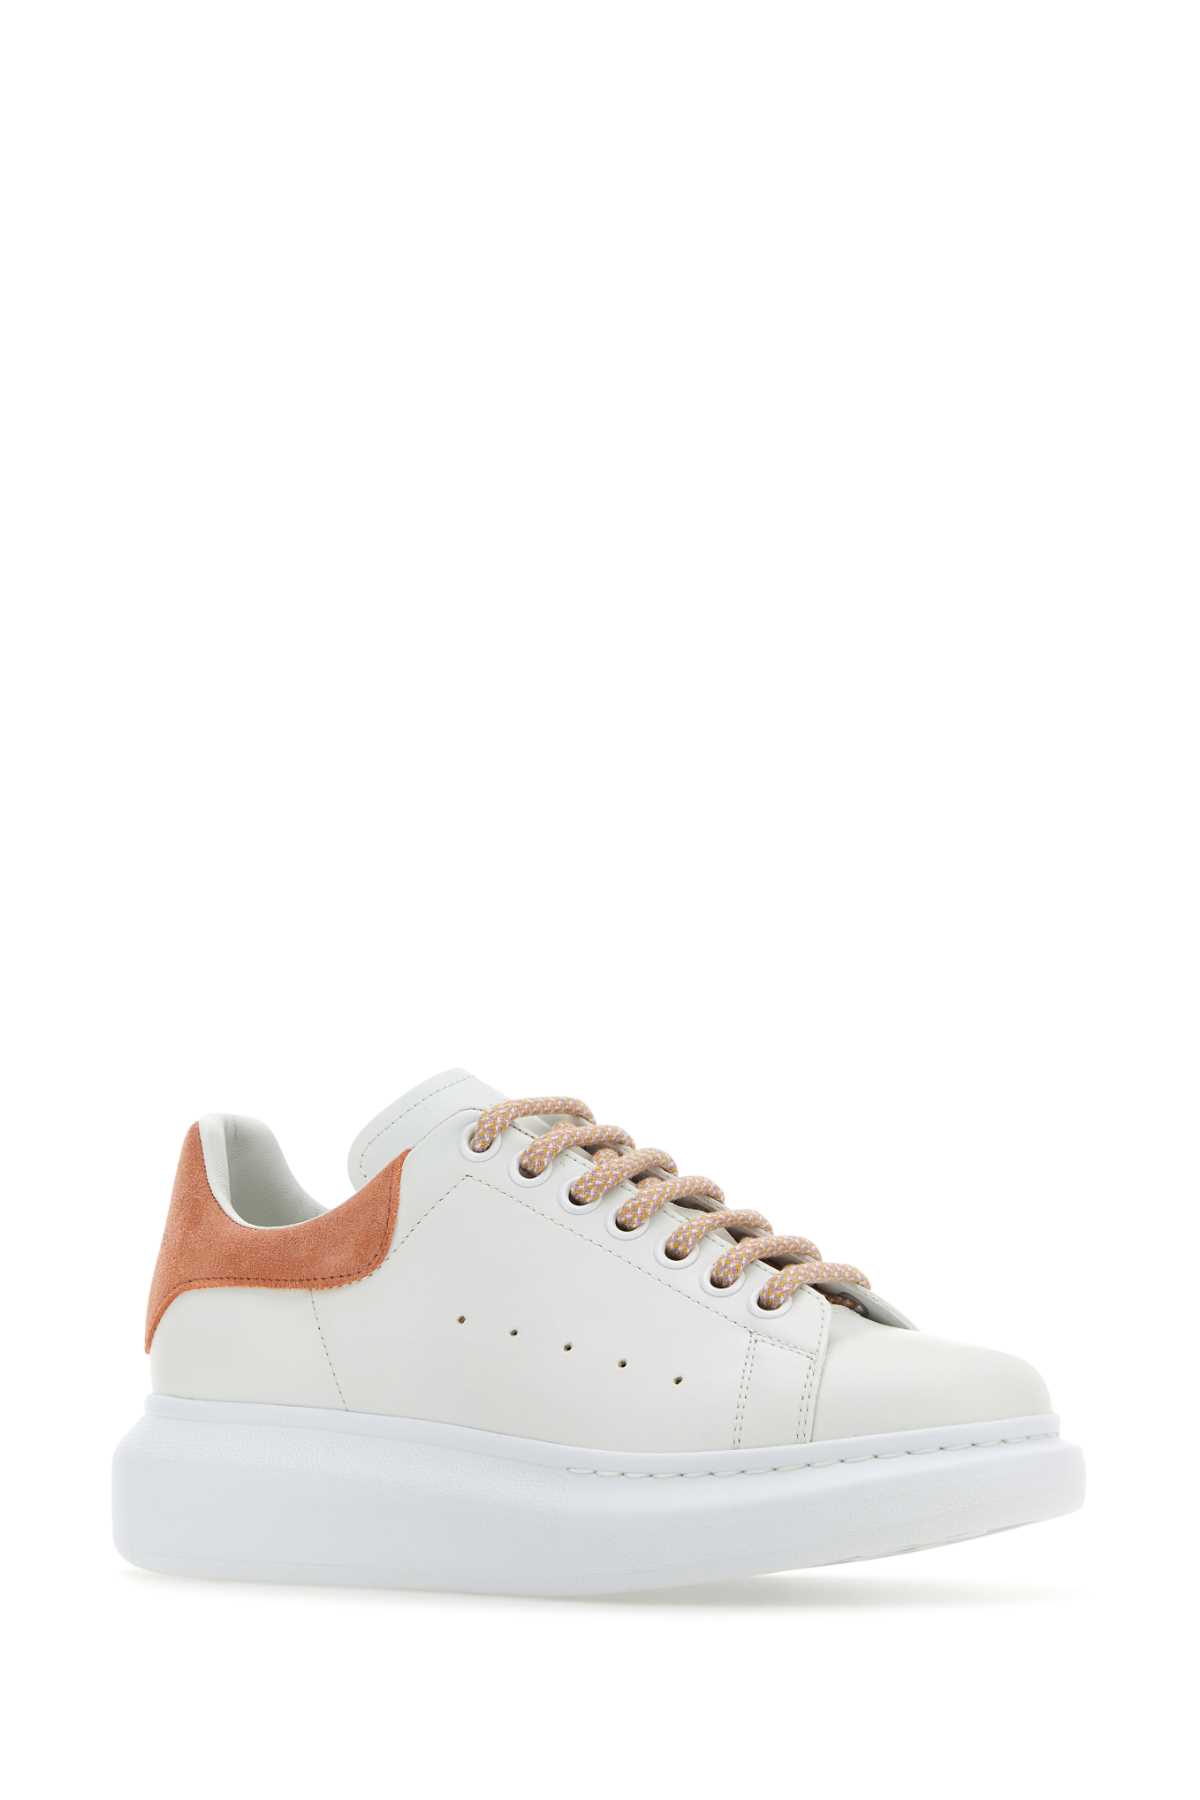 Shop Alexander Mcqueen White Leather Sneakers With Salmon Suede Heel In Whiteclay